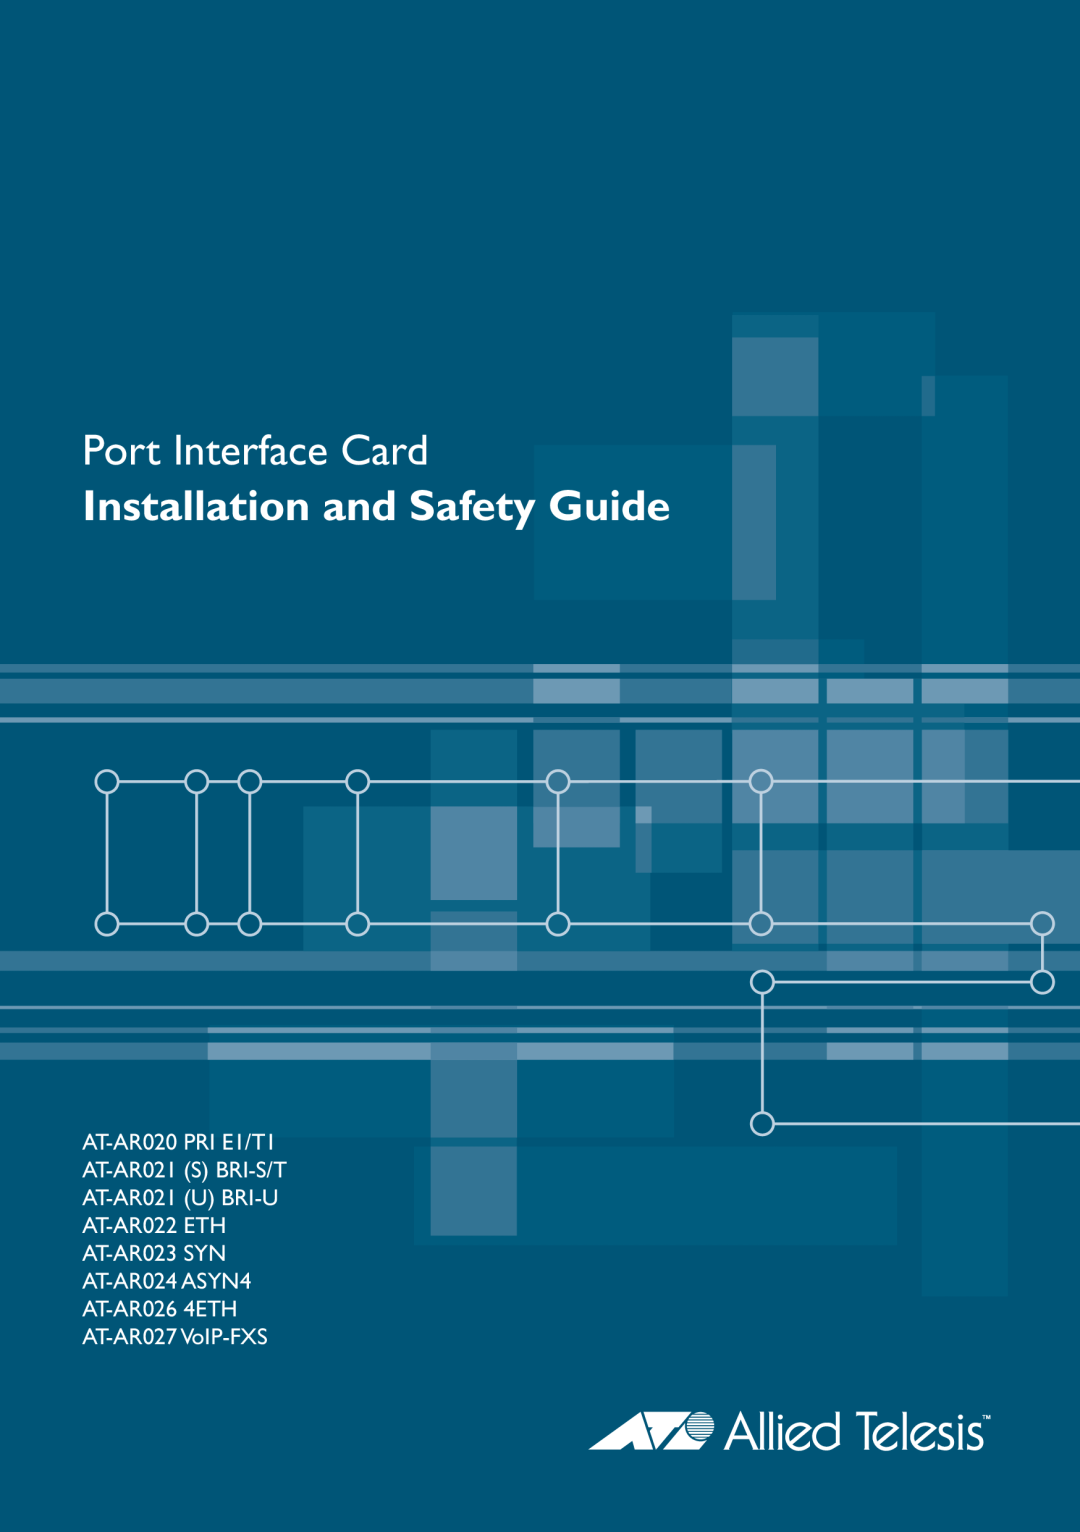 Allied Telesis AT-AR027VOLP-FXS, AT-AR020 PRI EI/TI manual Port Interface Card, Installation and Safety Guide 